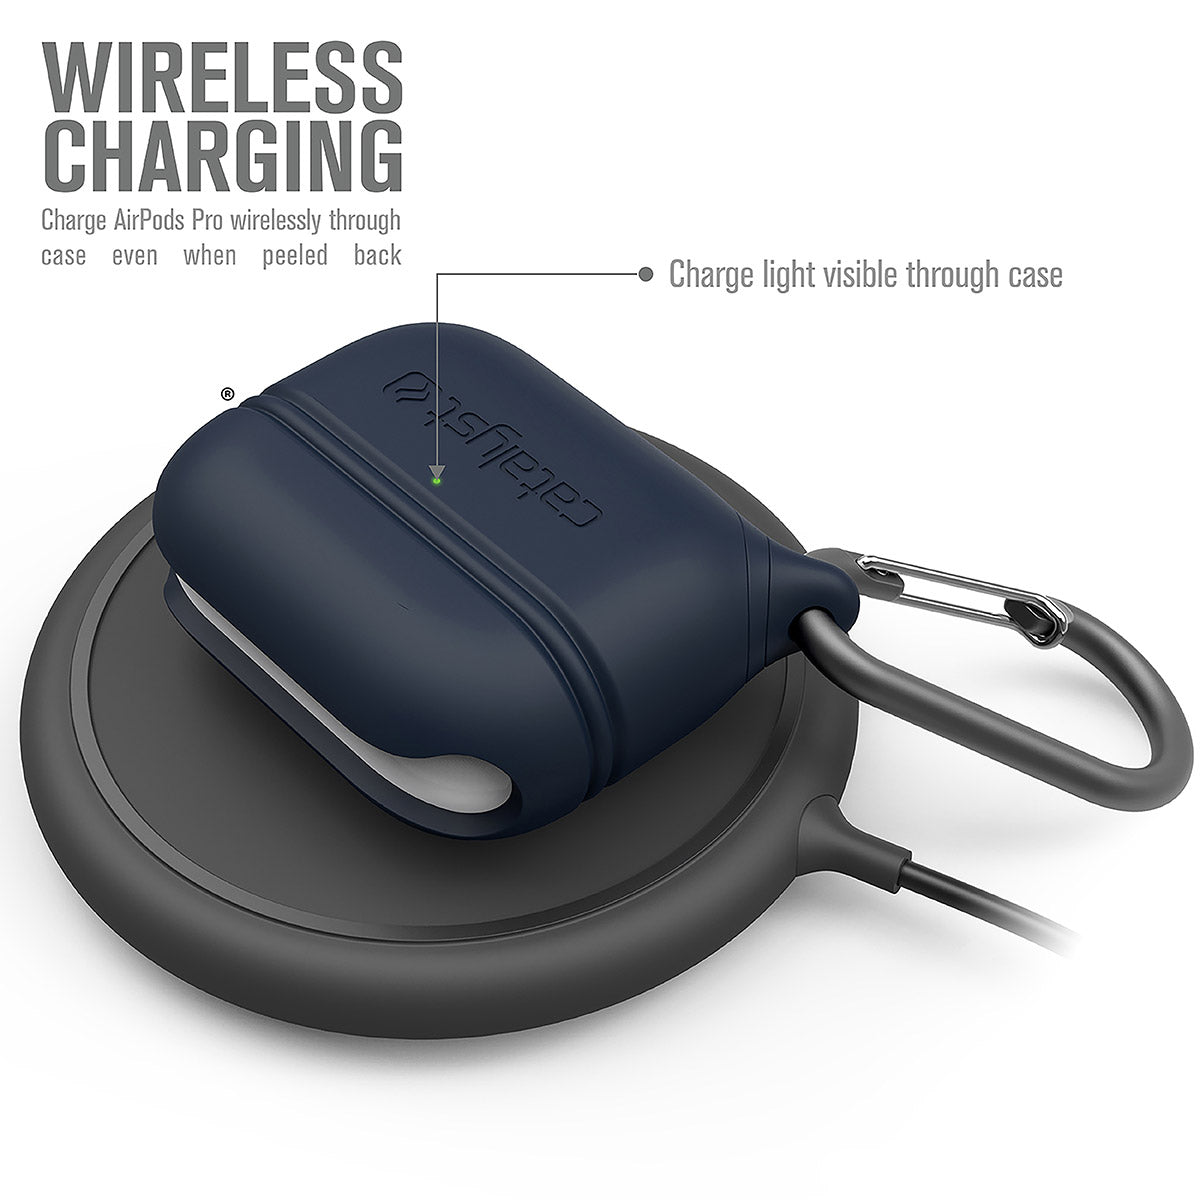 CATAPLAPDPRONAV | catalyst airpods pro gen 2 1 waterproof case carabiner special edition blue on top of a wireless charger text reads wireless charging charge airpods pro wirelessly through case even when peeled back charge light visible through case